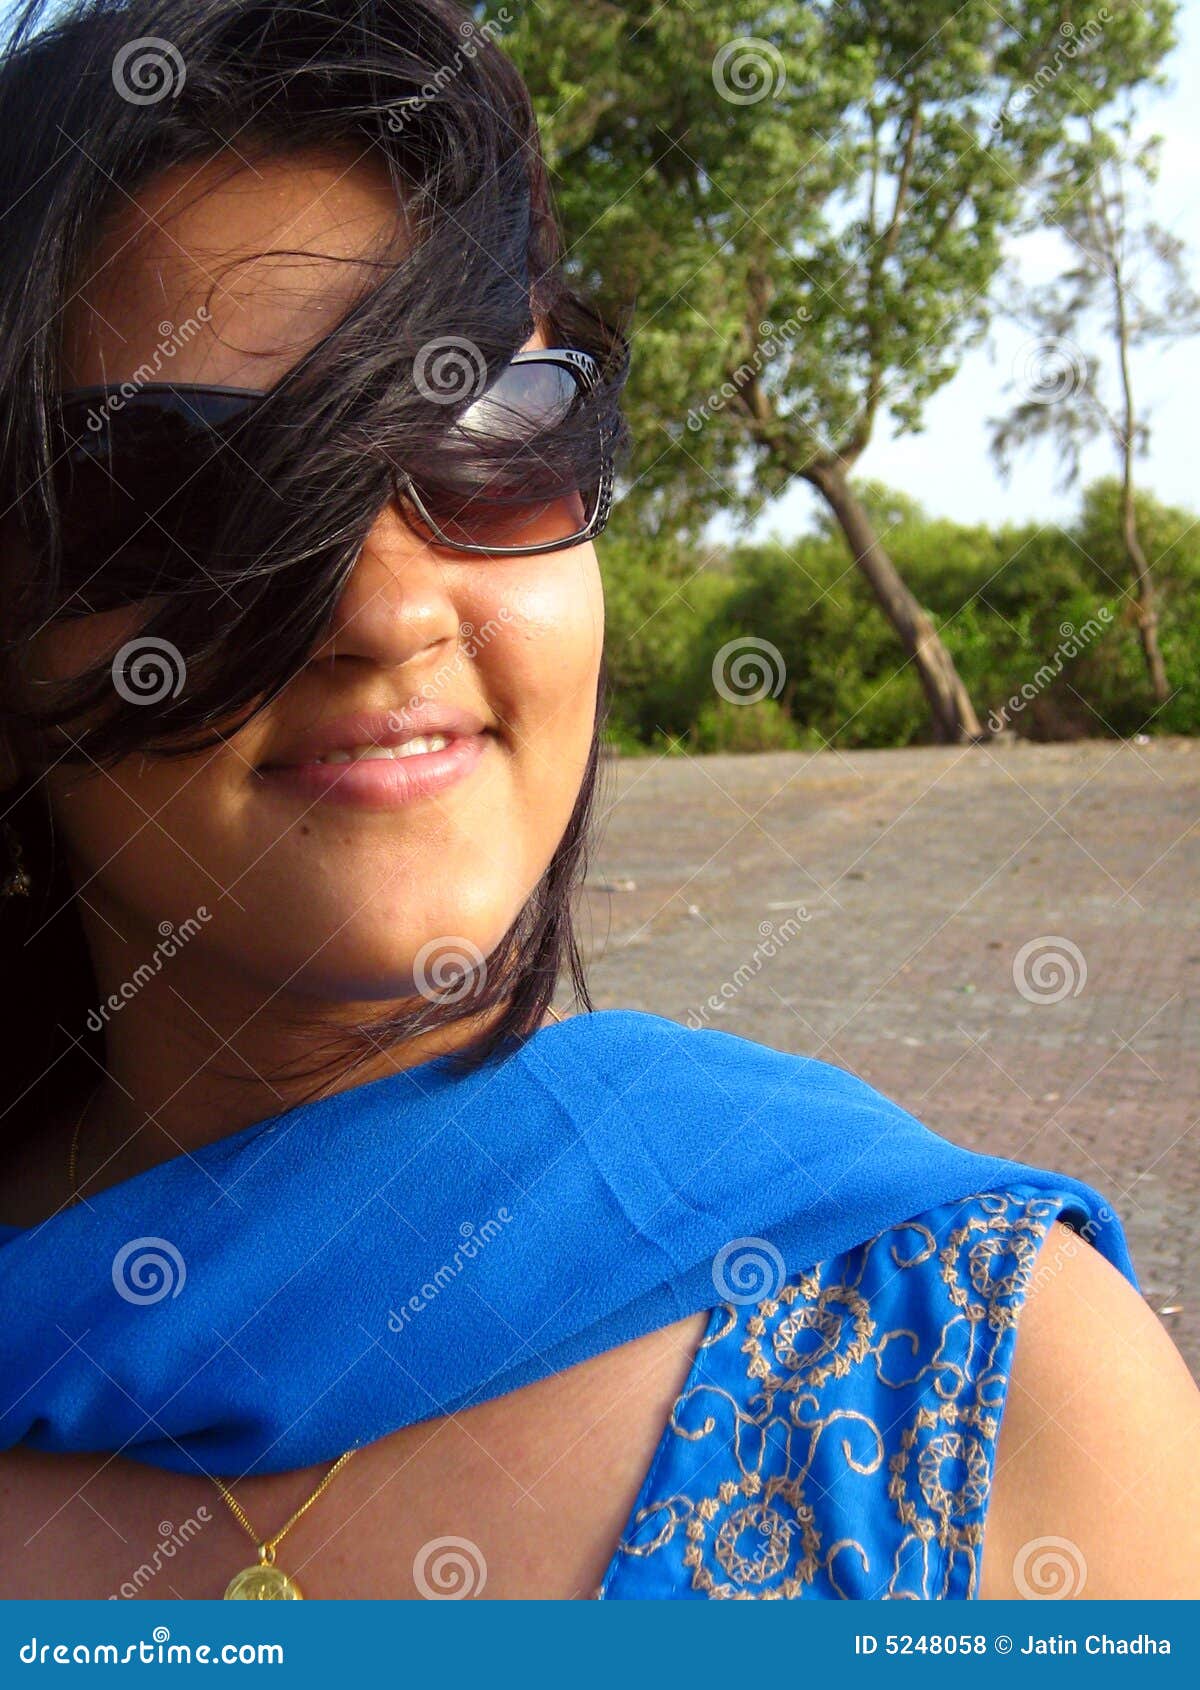 Cute Girl Smiling Wearing Sunglasses Royalty Free Stock